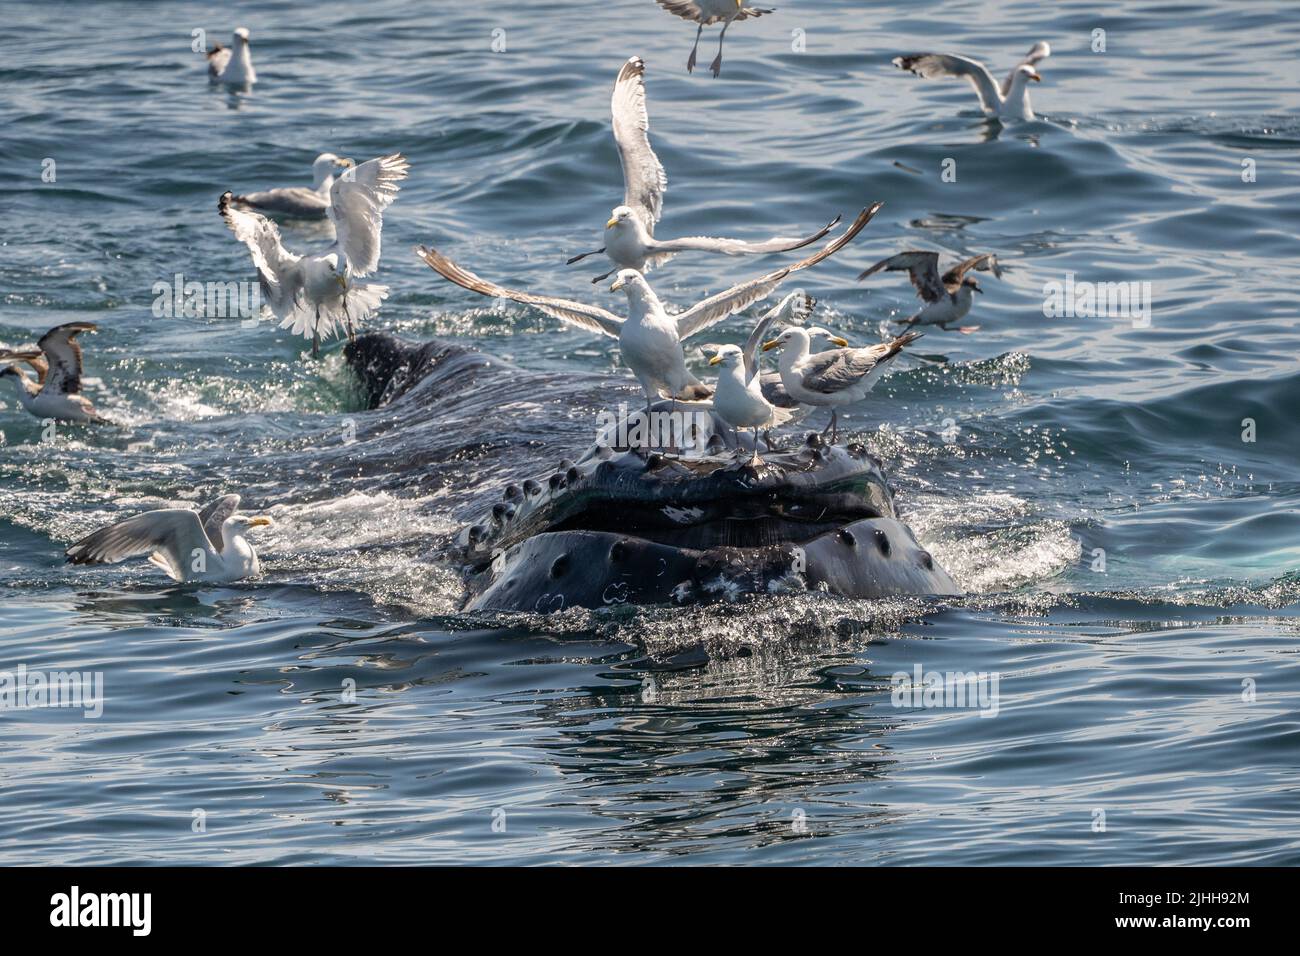 Humpback whales (Megaptera novaeangliae) bubble-net feeds near whale watching boat off the coast of Cape Cod Stock Photo